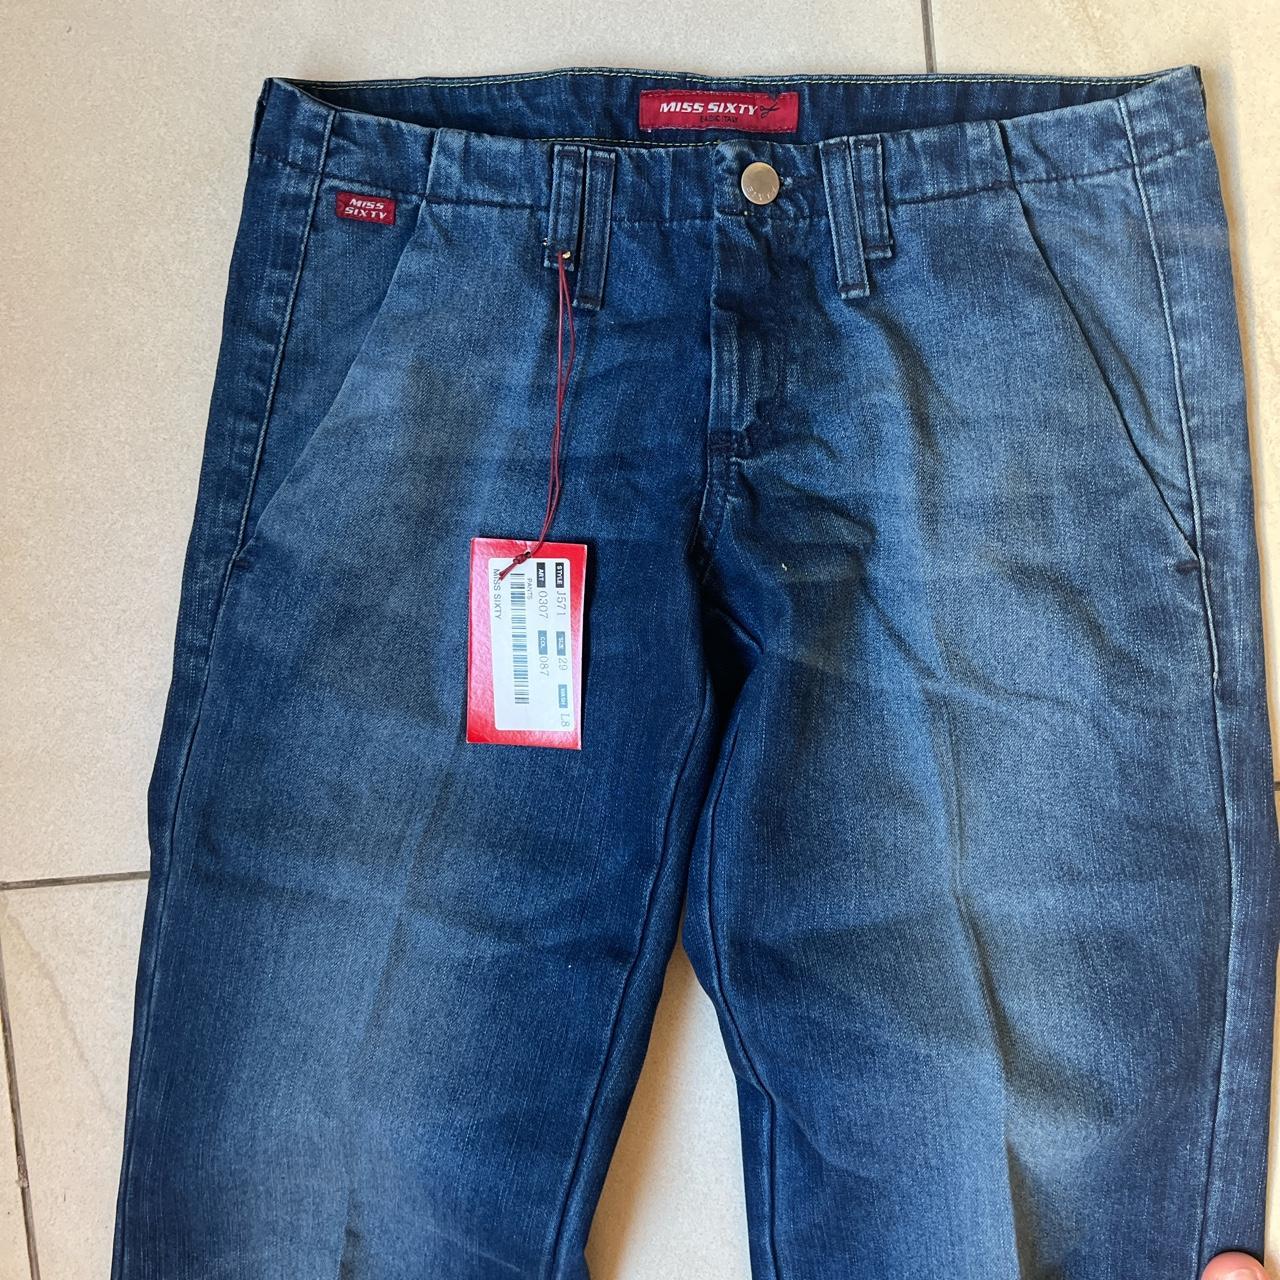 low rise jeans y2k miss sixty new with tag - Depop